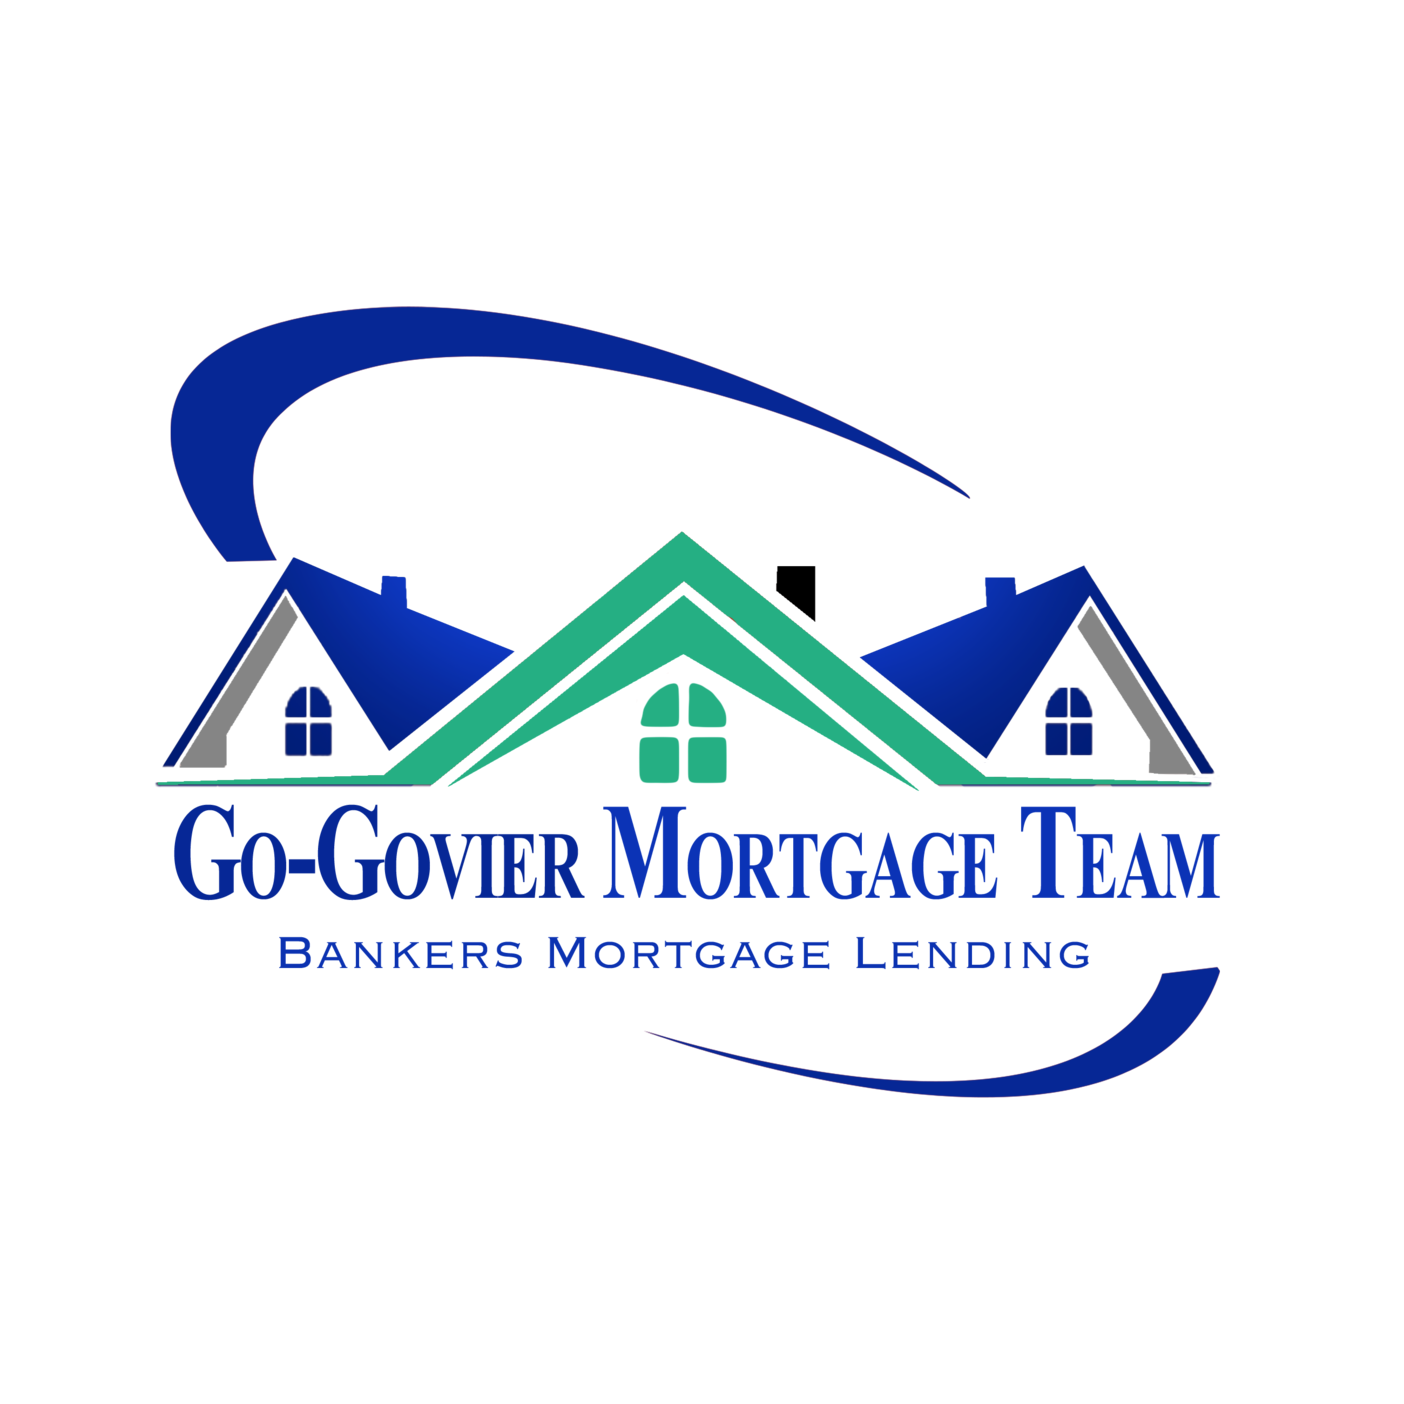 Go-Govier Mortgage Team Powered by Bankers Mortgage Lending Photo